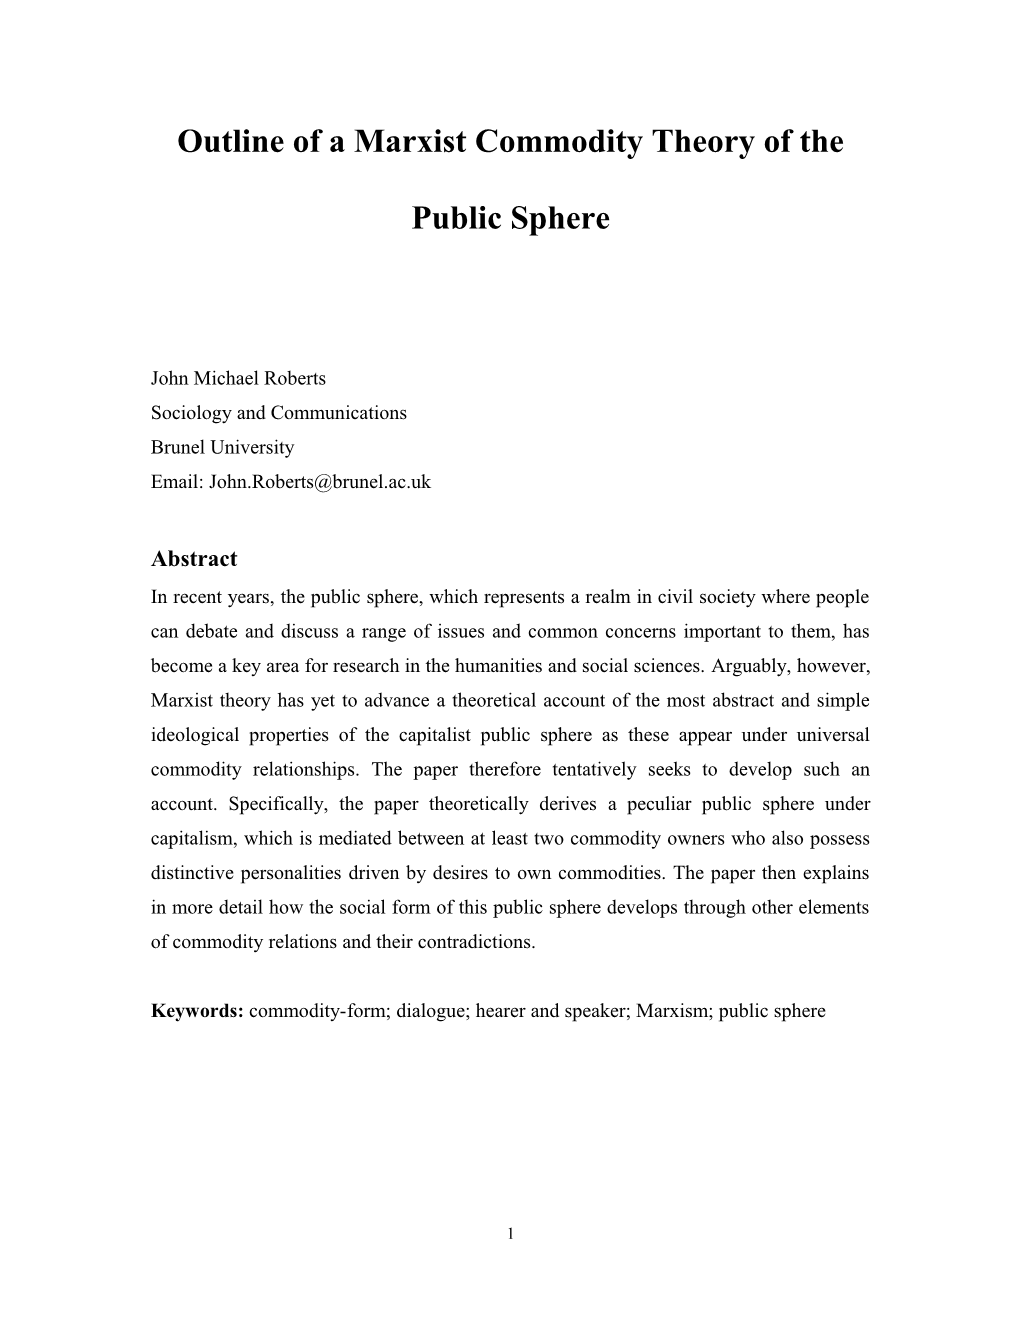 Outline of a Marxist Theory of the Public Sphere